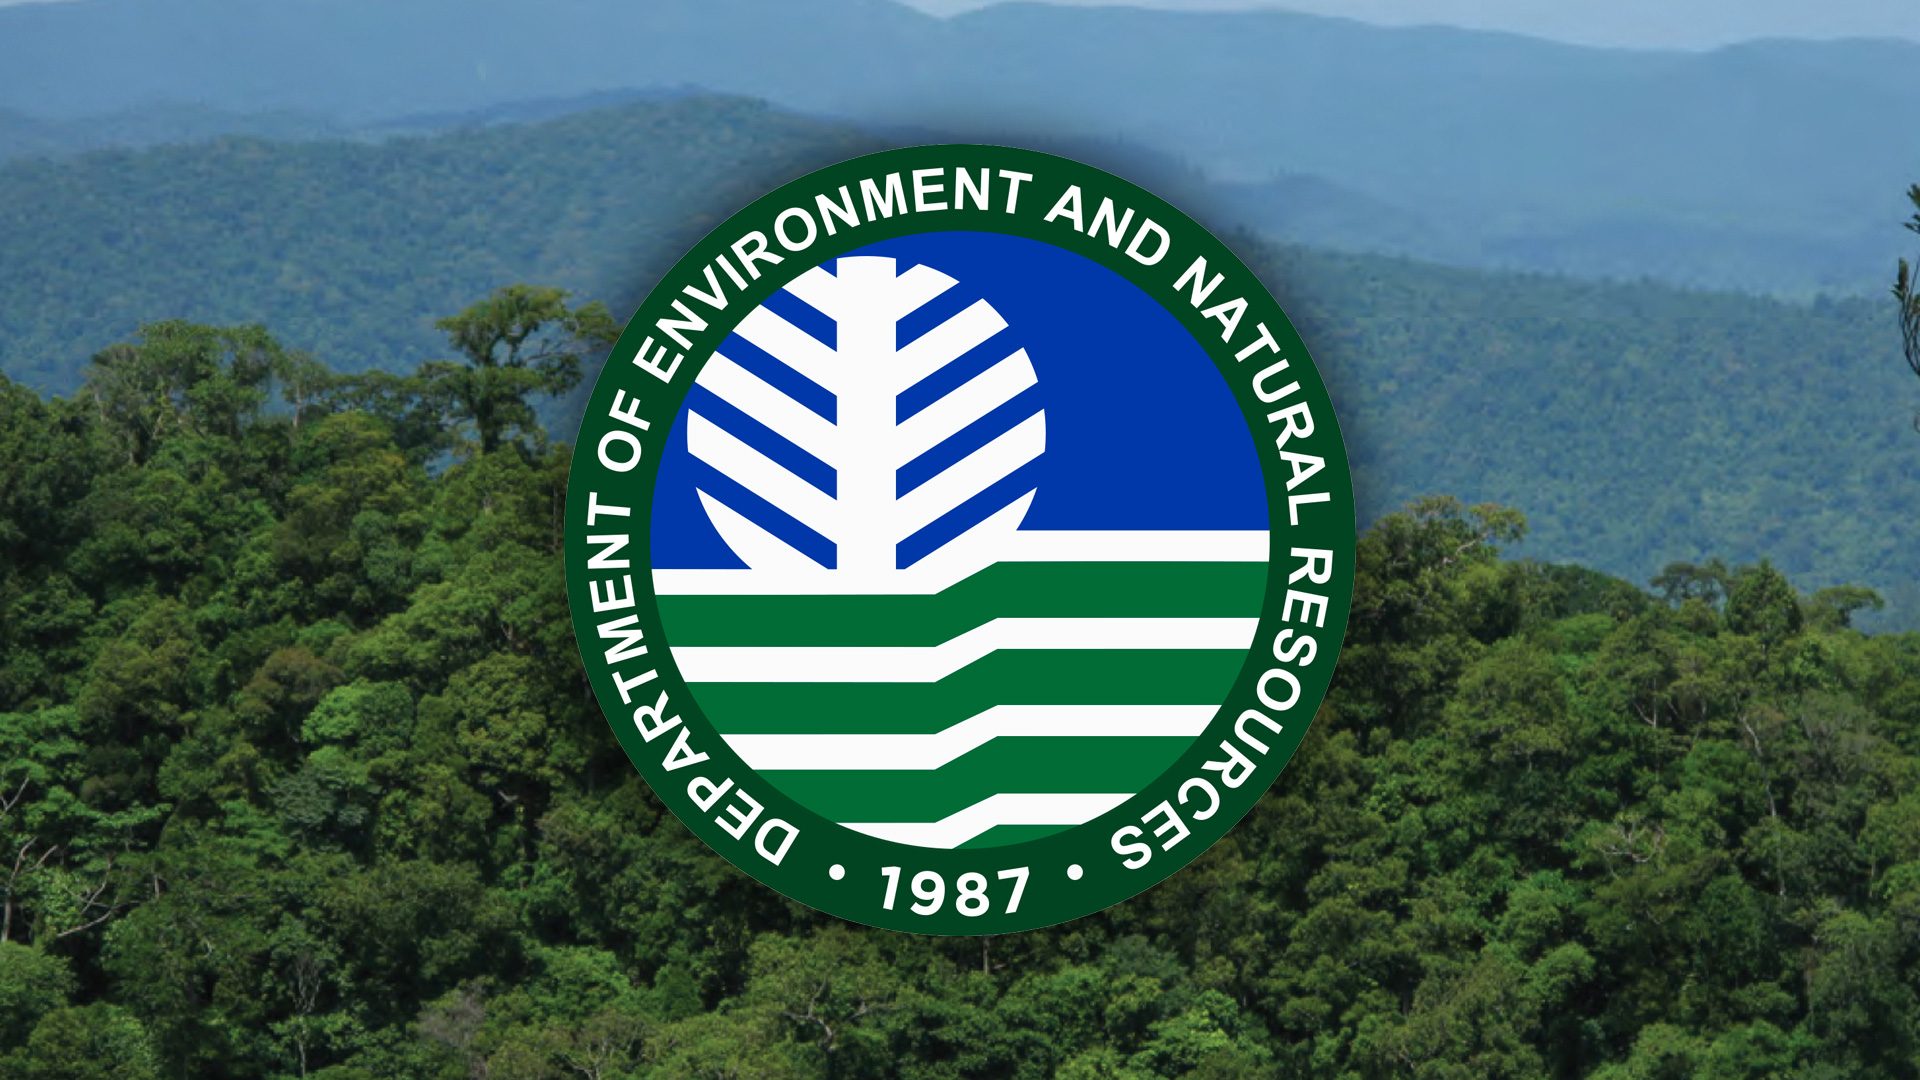 DENR to stop issuing permits, agreements for use of protected areas